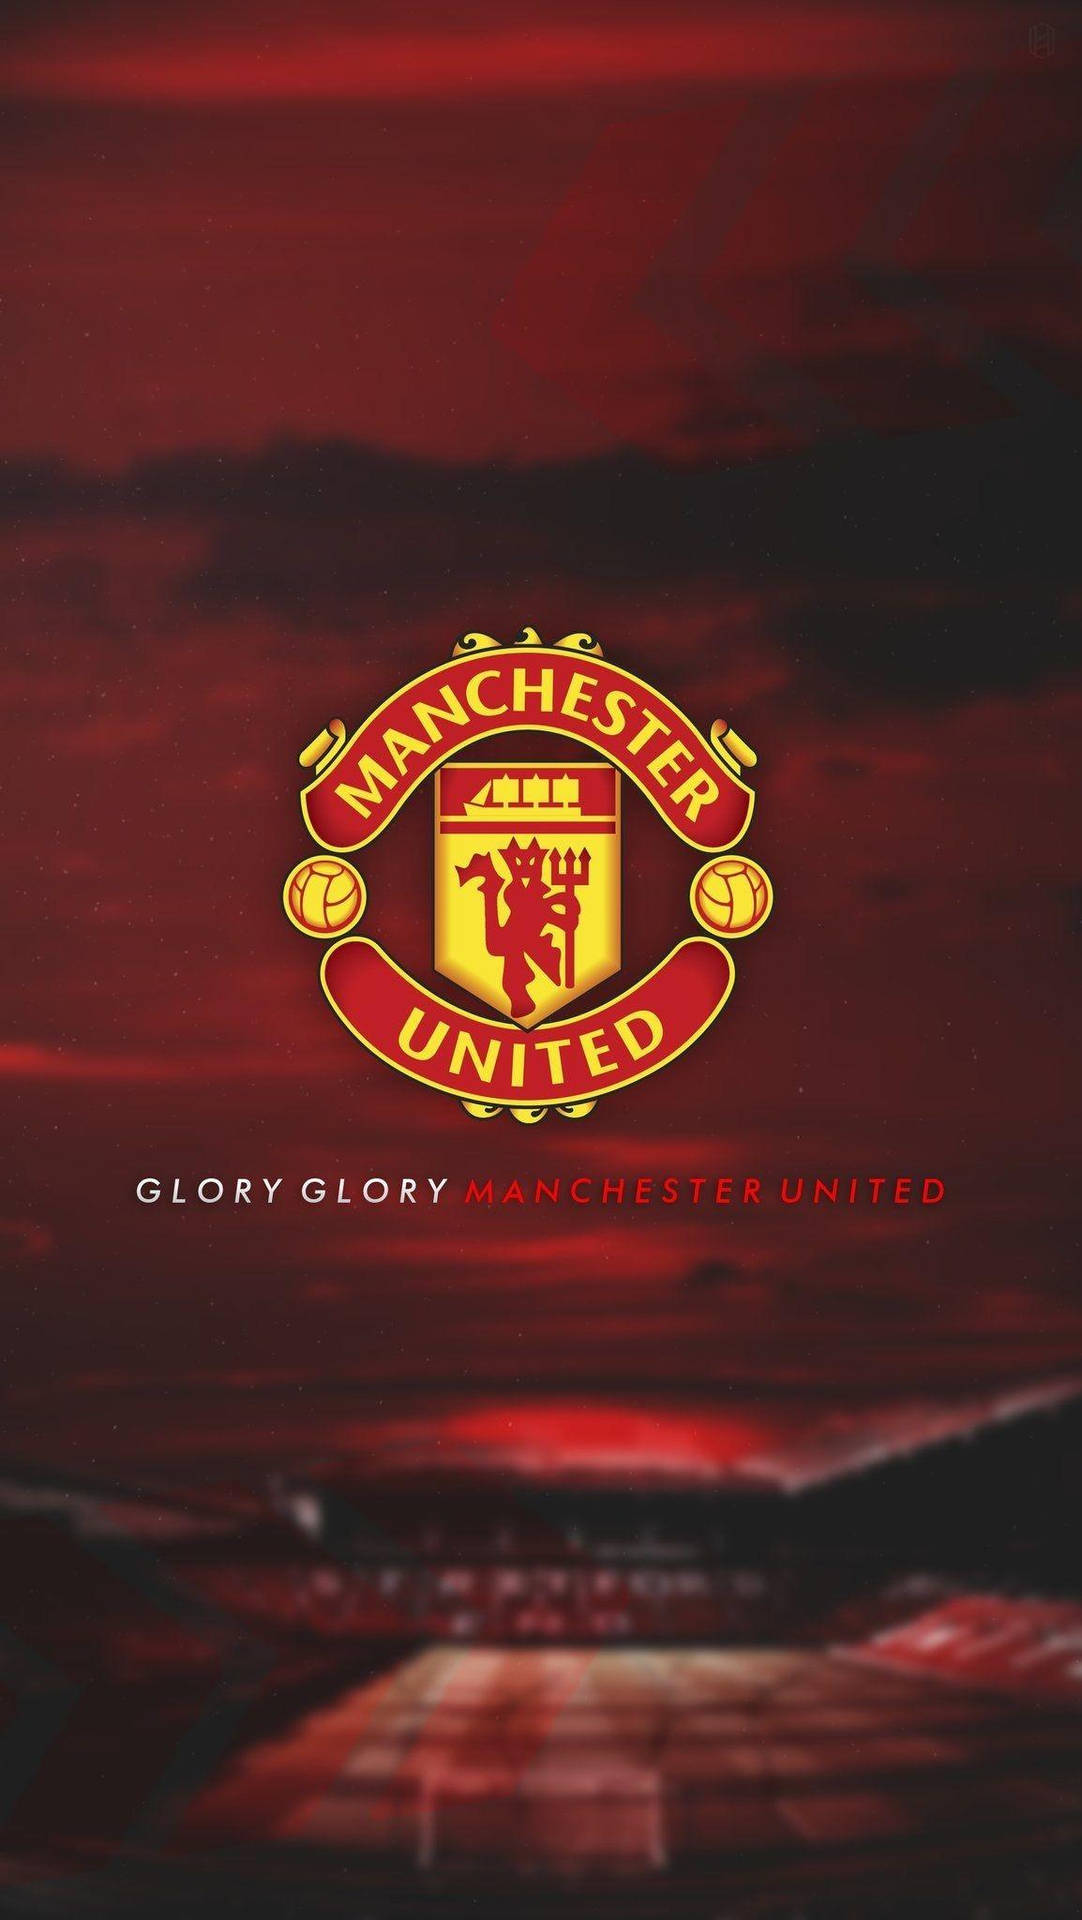 Manchester United Emblem With A Fiery Background Background